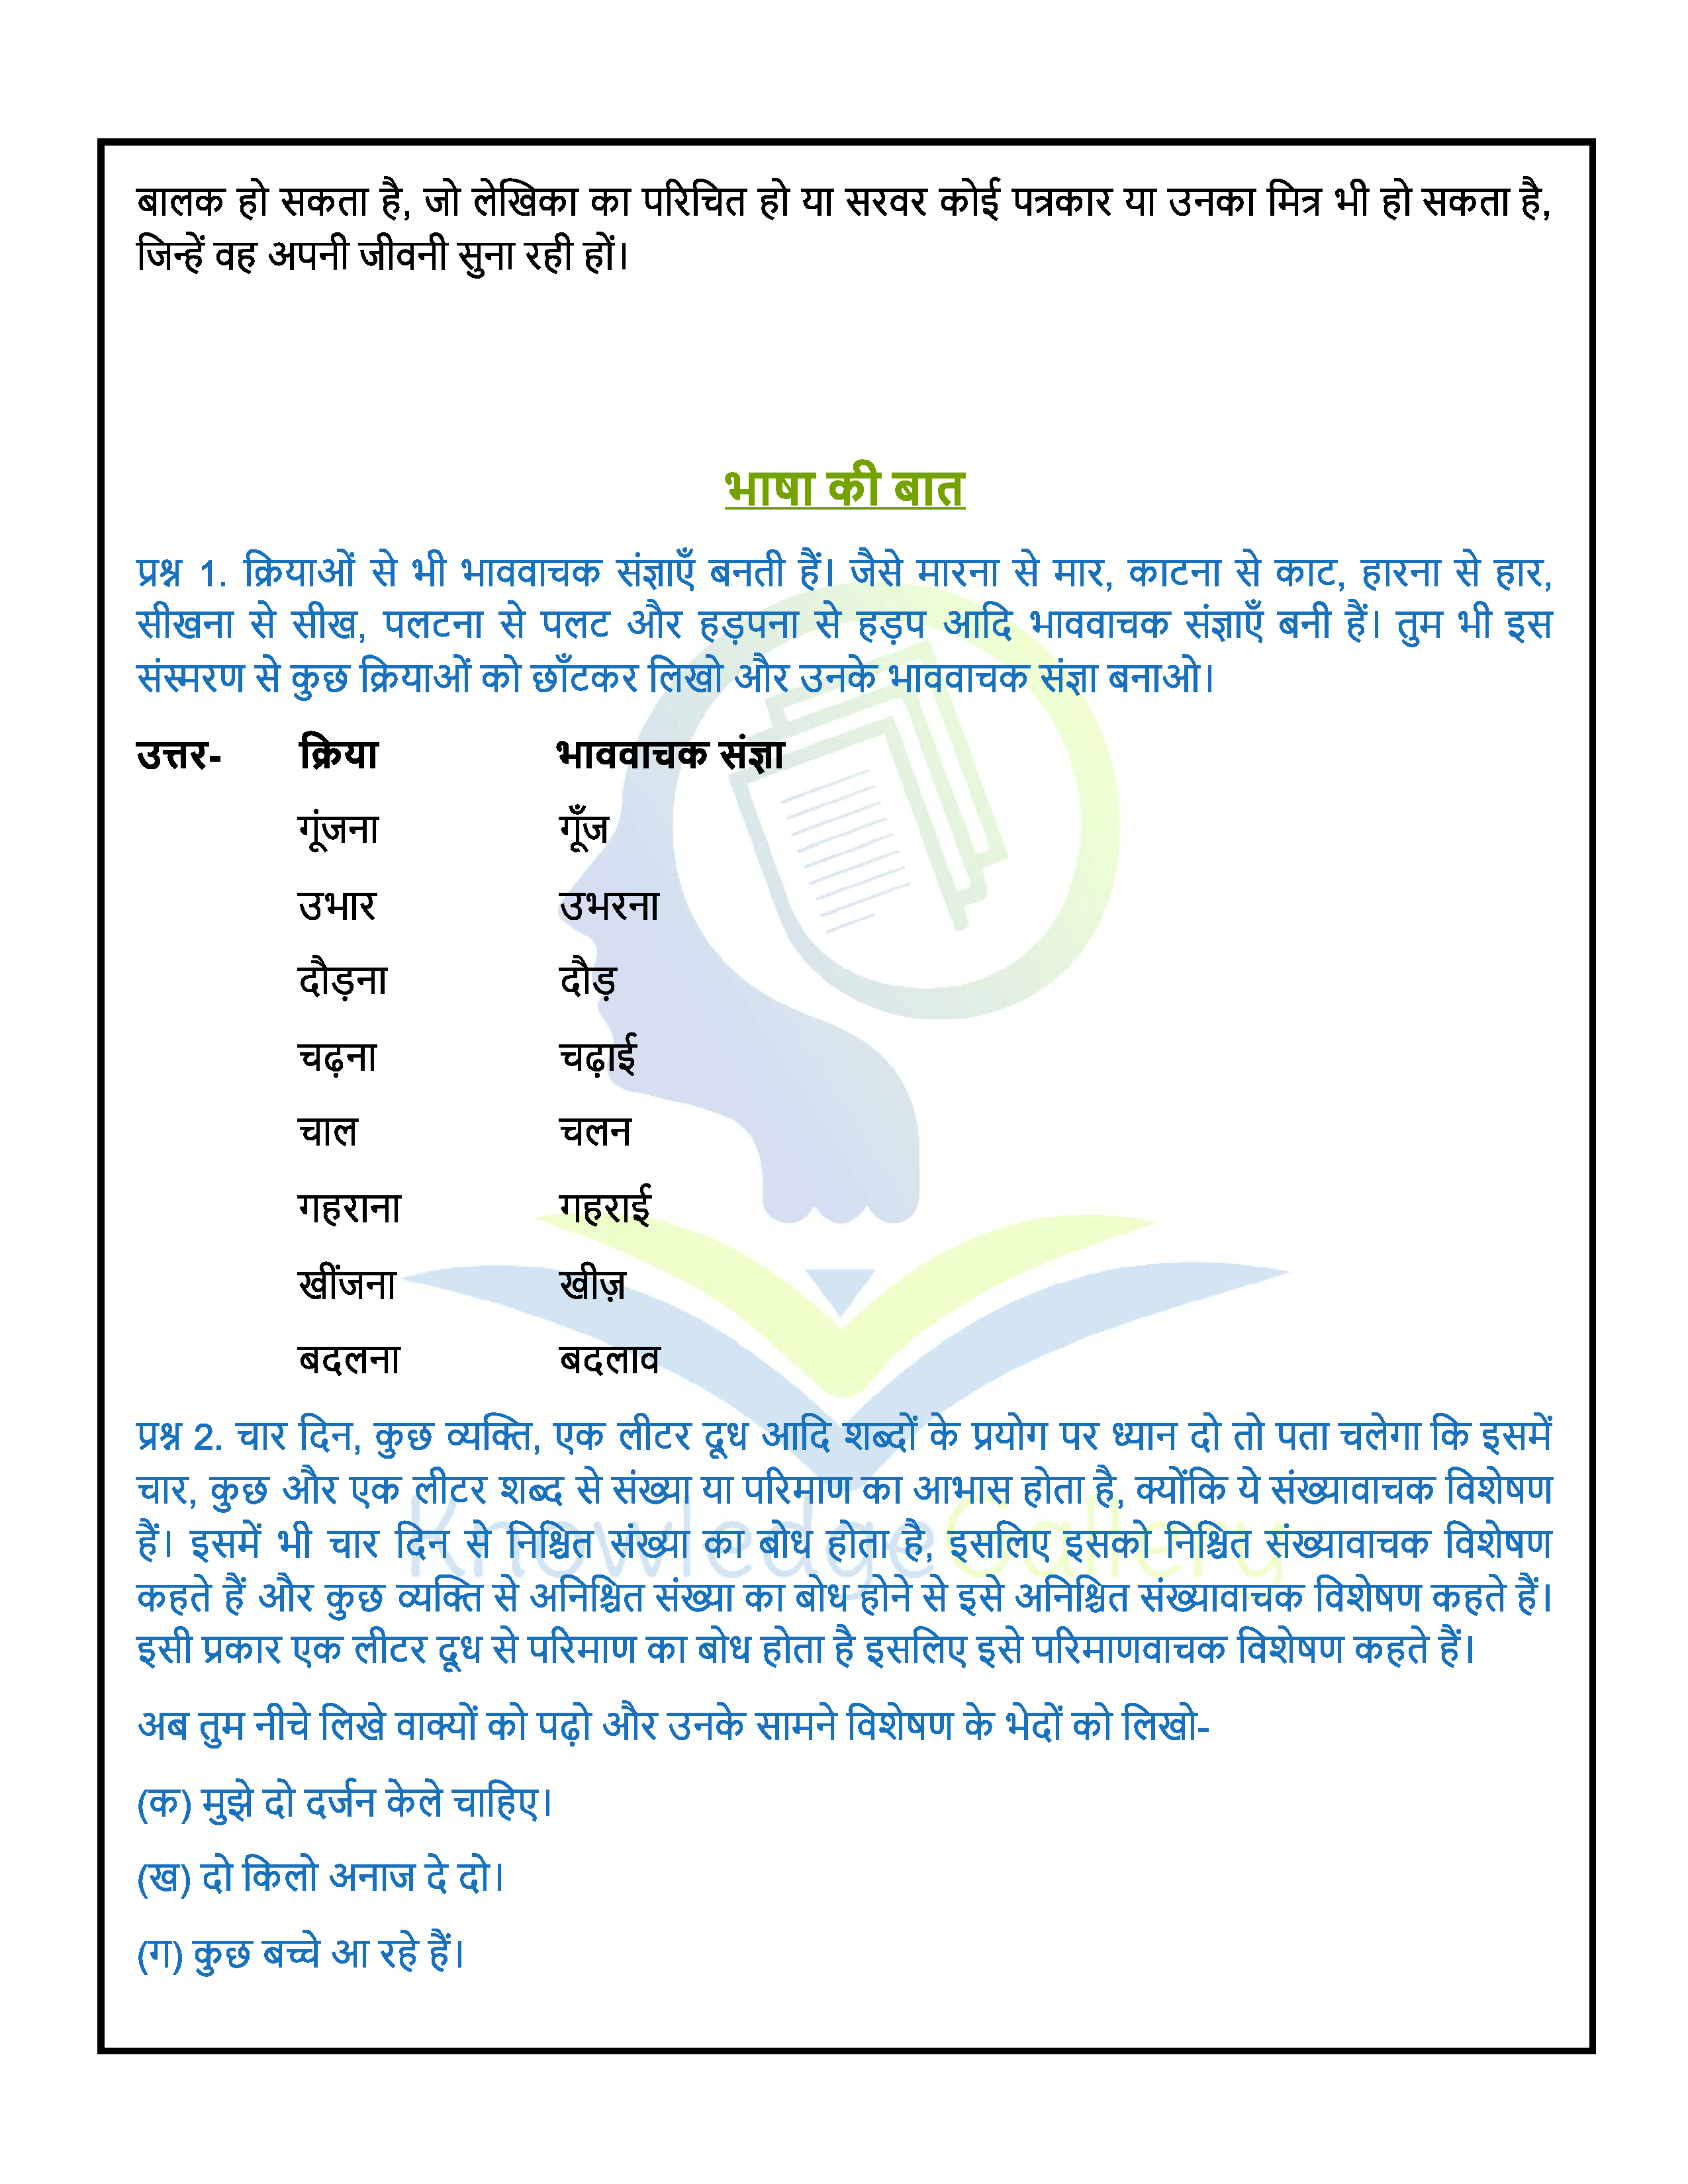 NCERT Solution For Class 6 Hindi Chapter 2 part 3